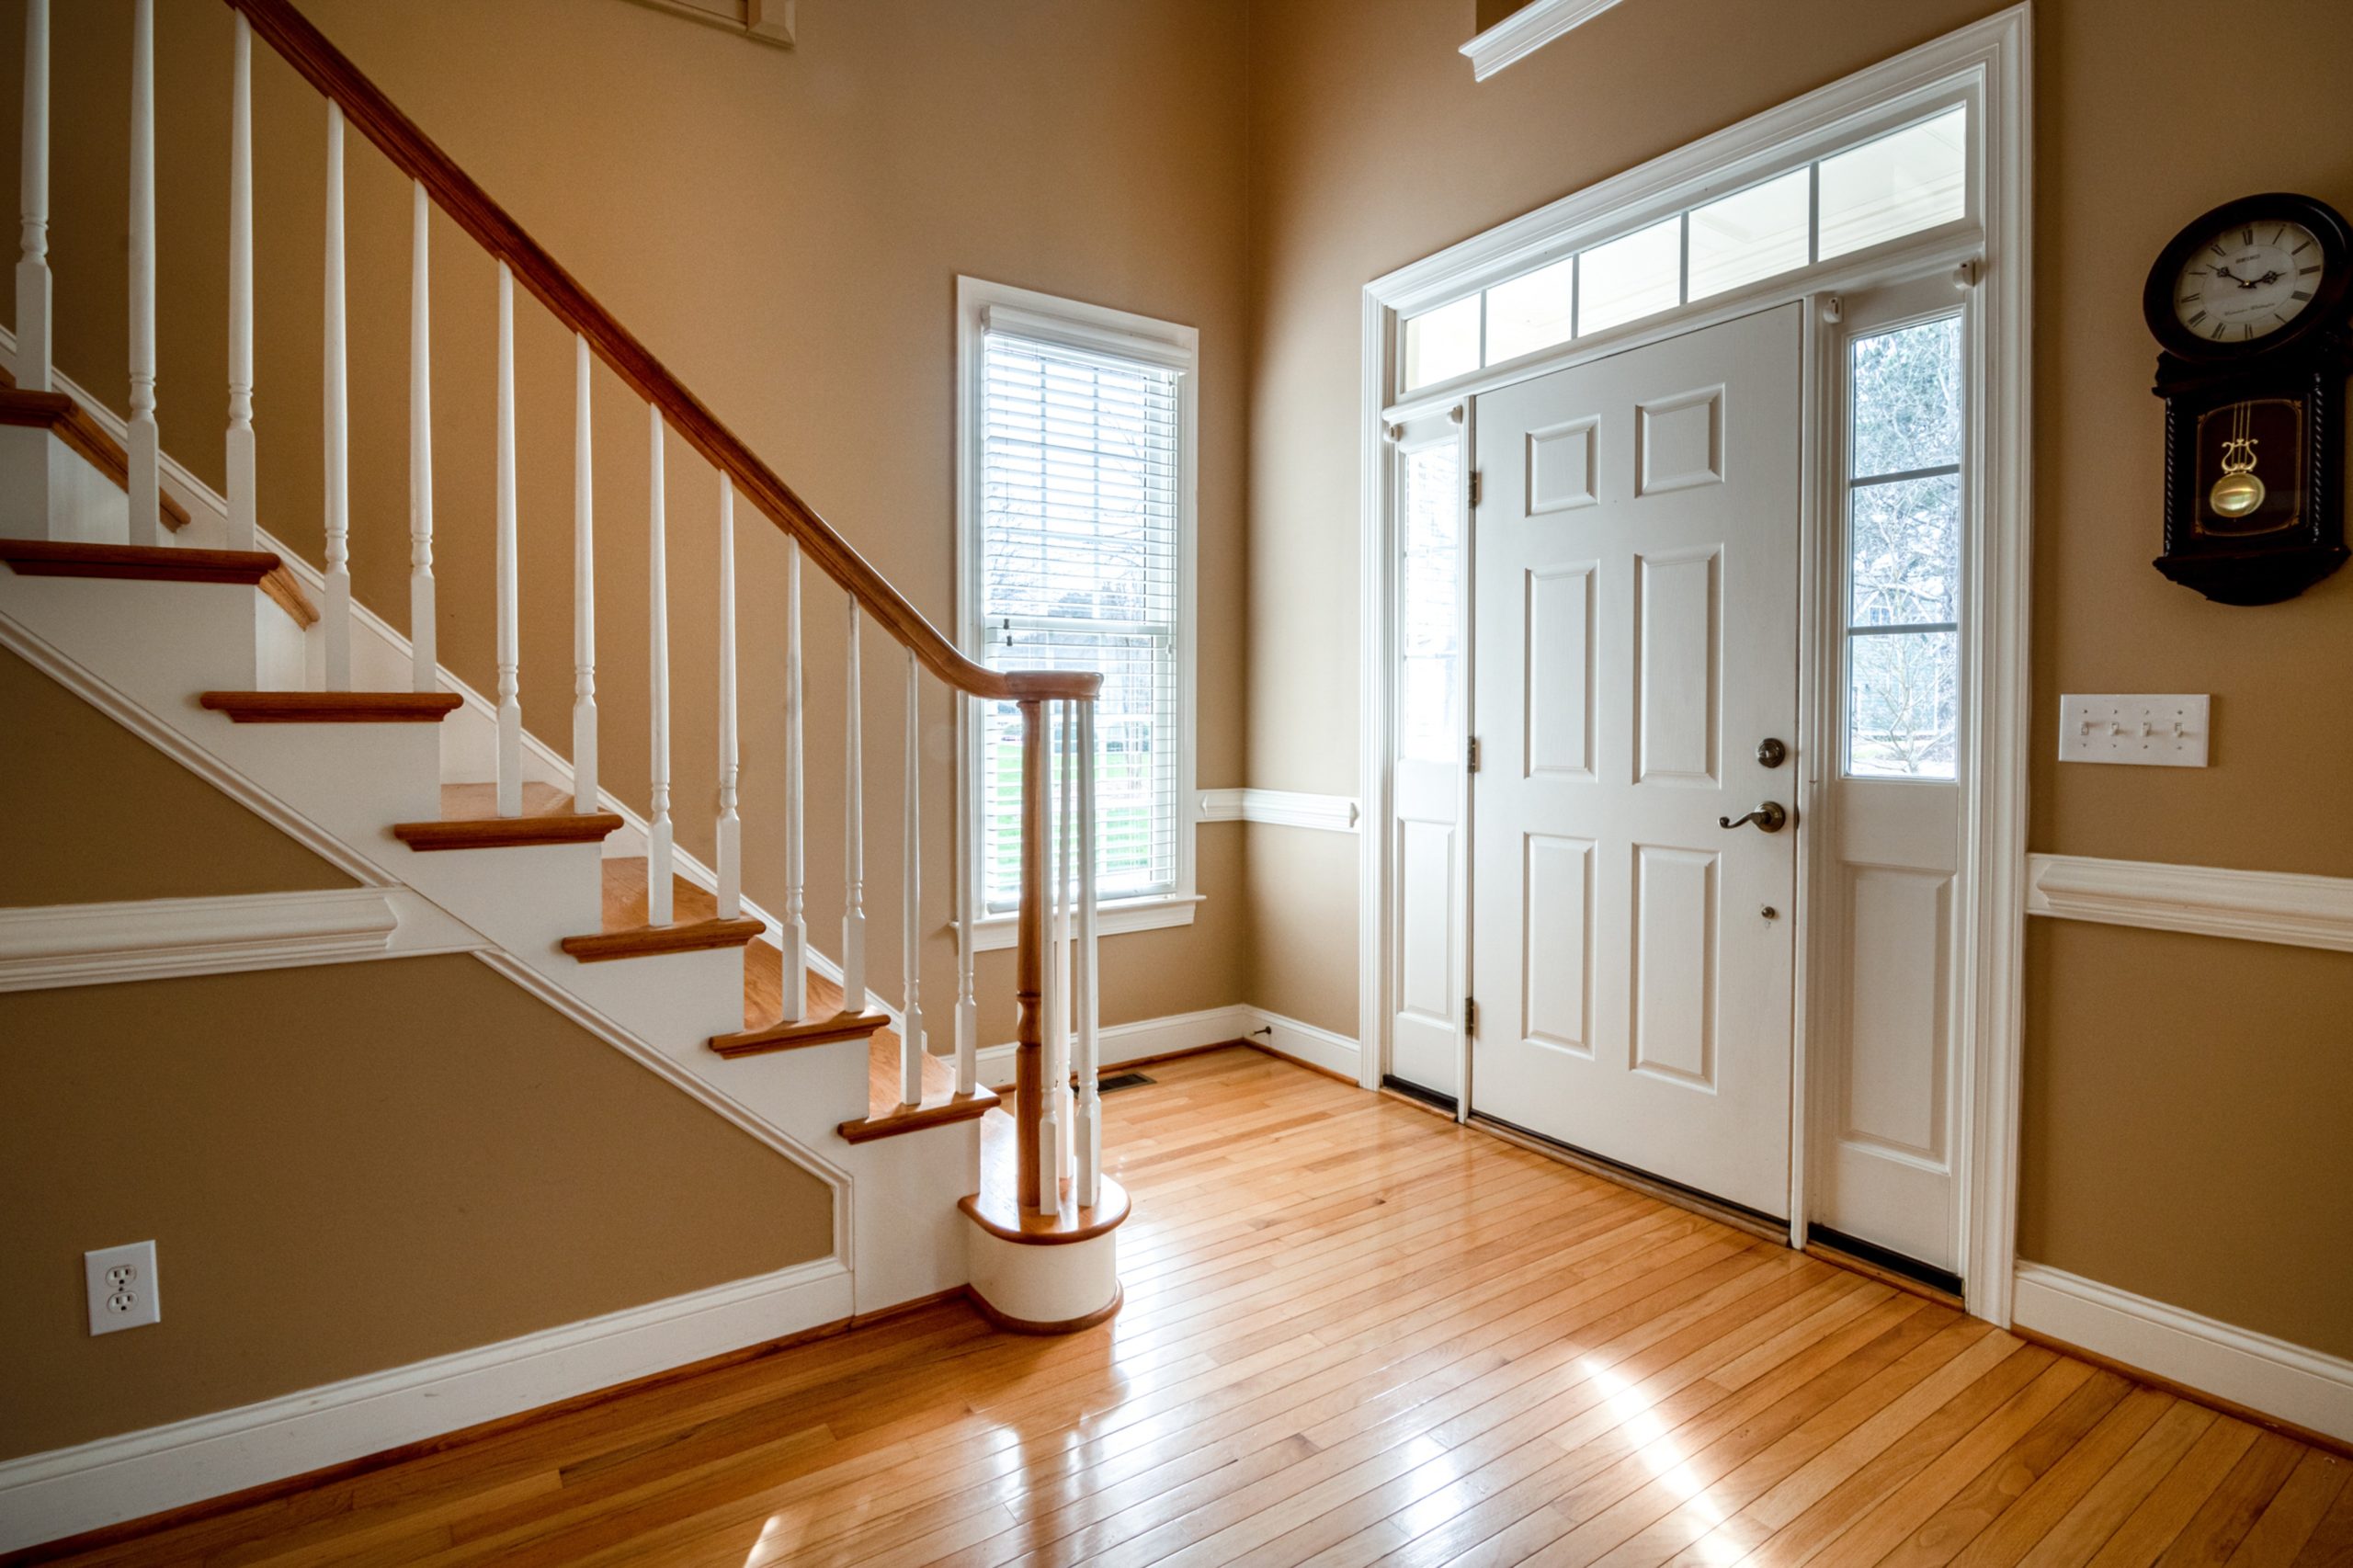 Interior of home with a wooden staircase leading to an energy-efficient white entry door with sidelites.